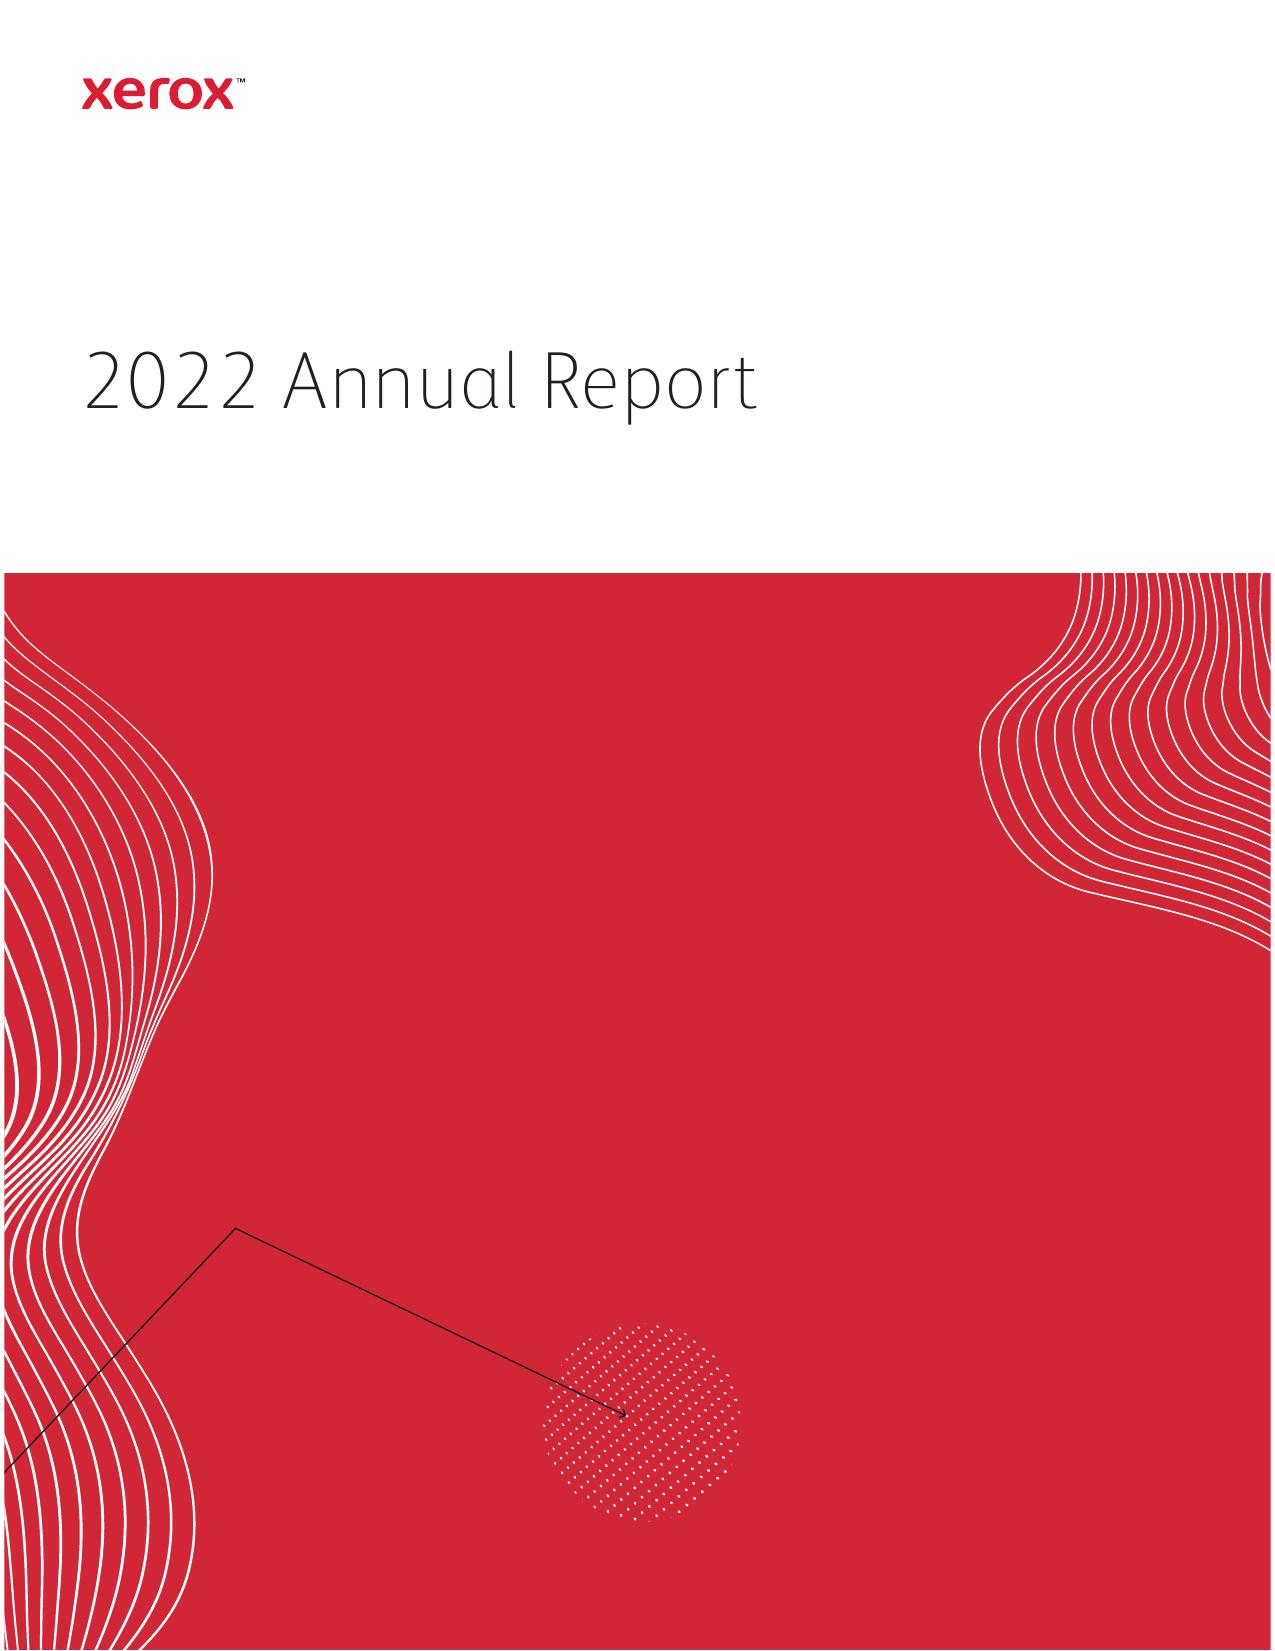 MARCONET 2022 Annual Report